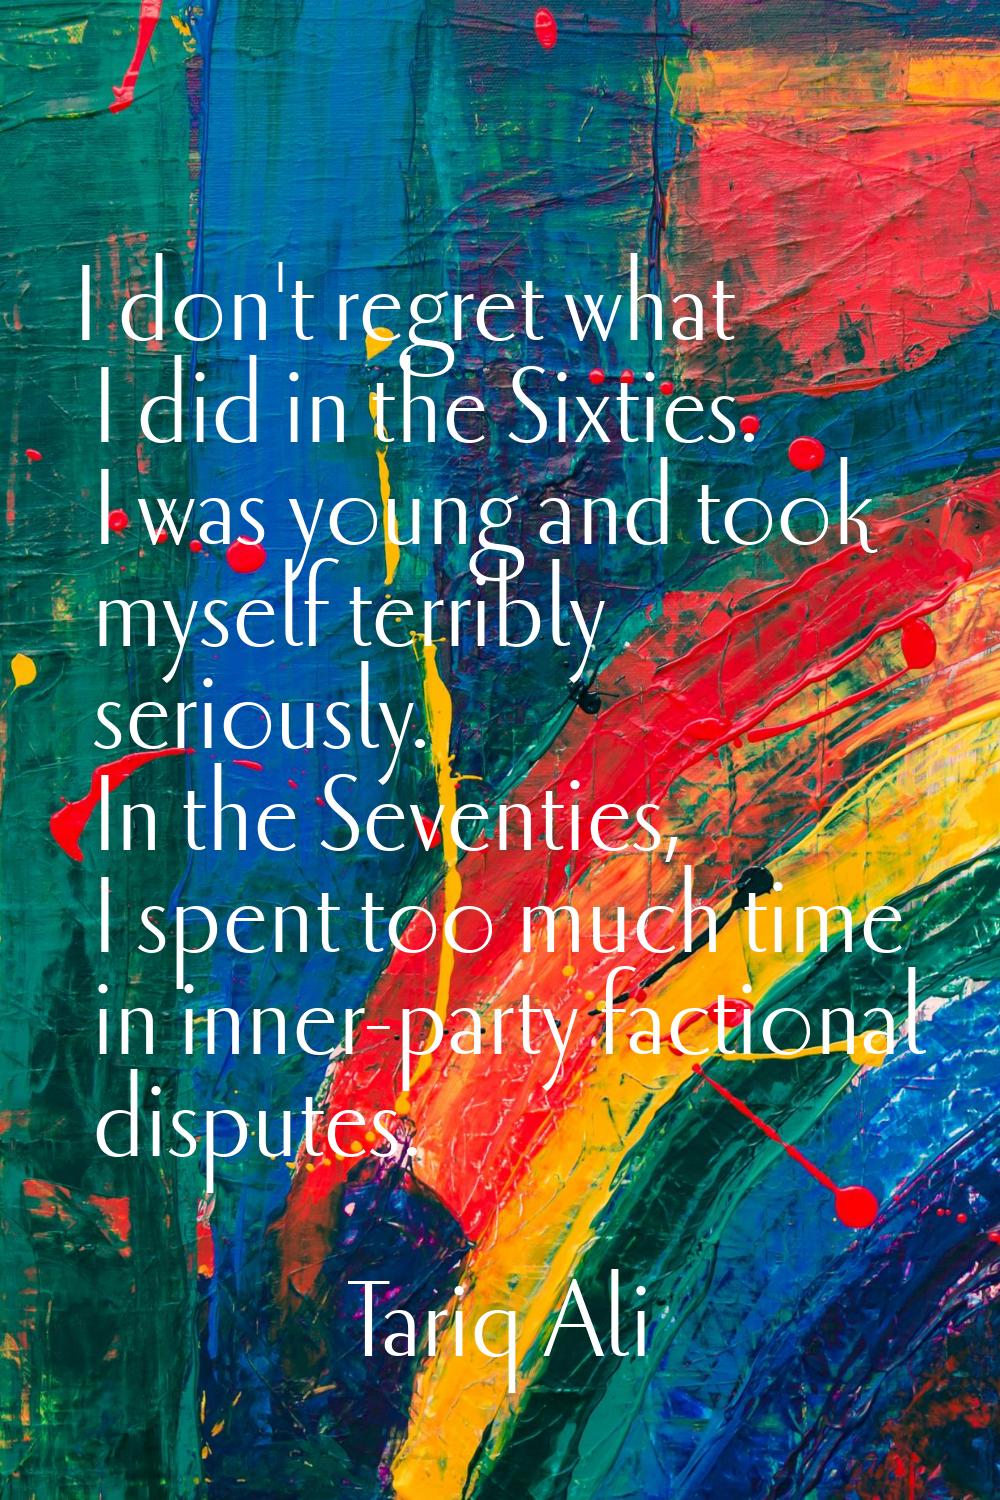 I don't regret what I did in the Sixties. I was young and took myself terribly seriously. In the Se